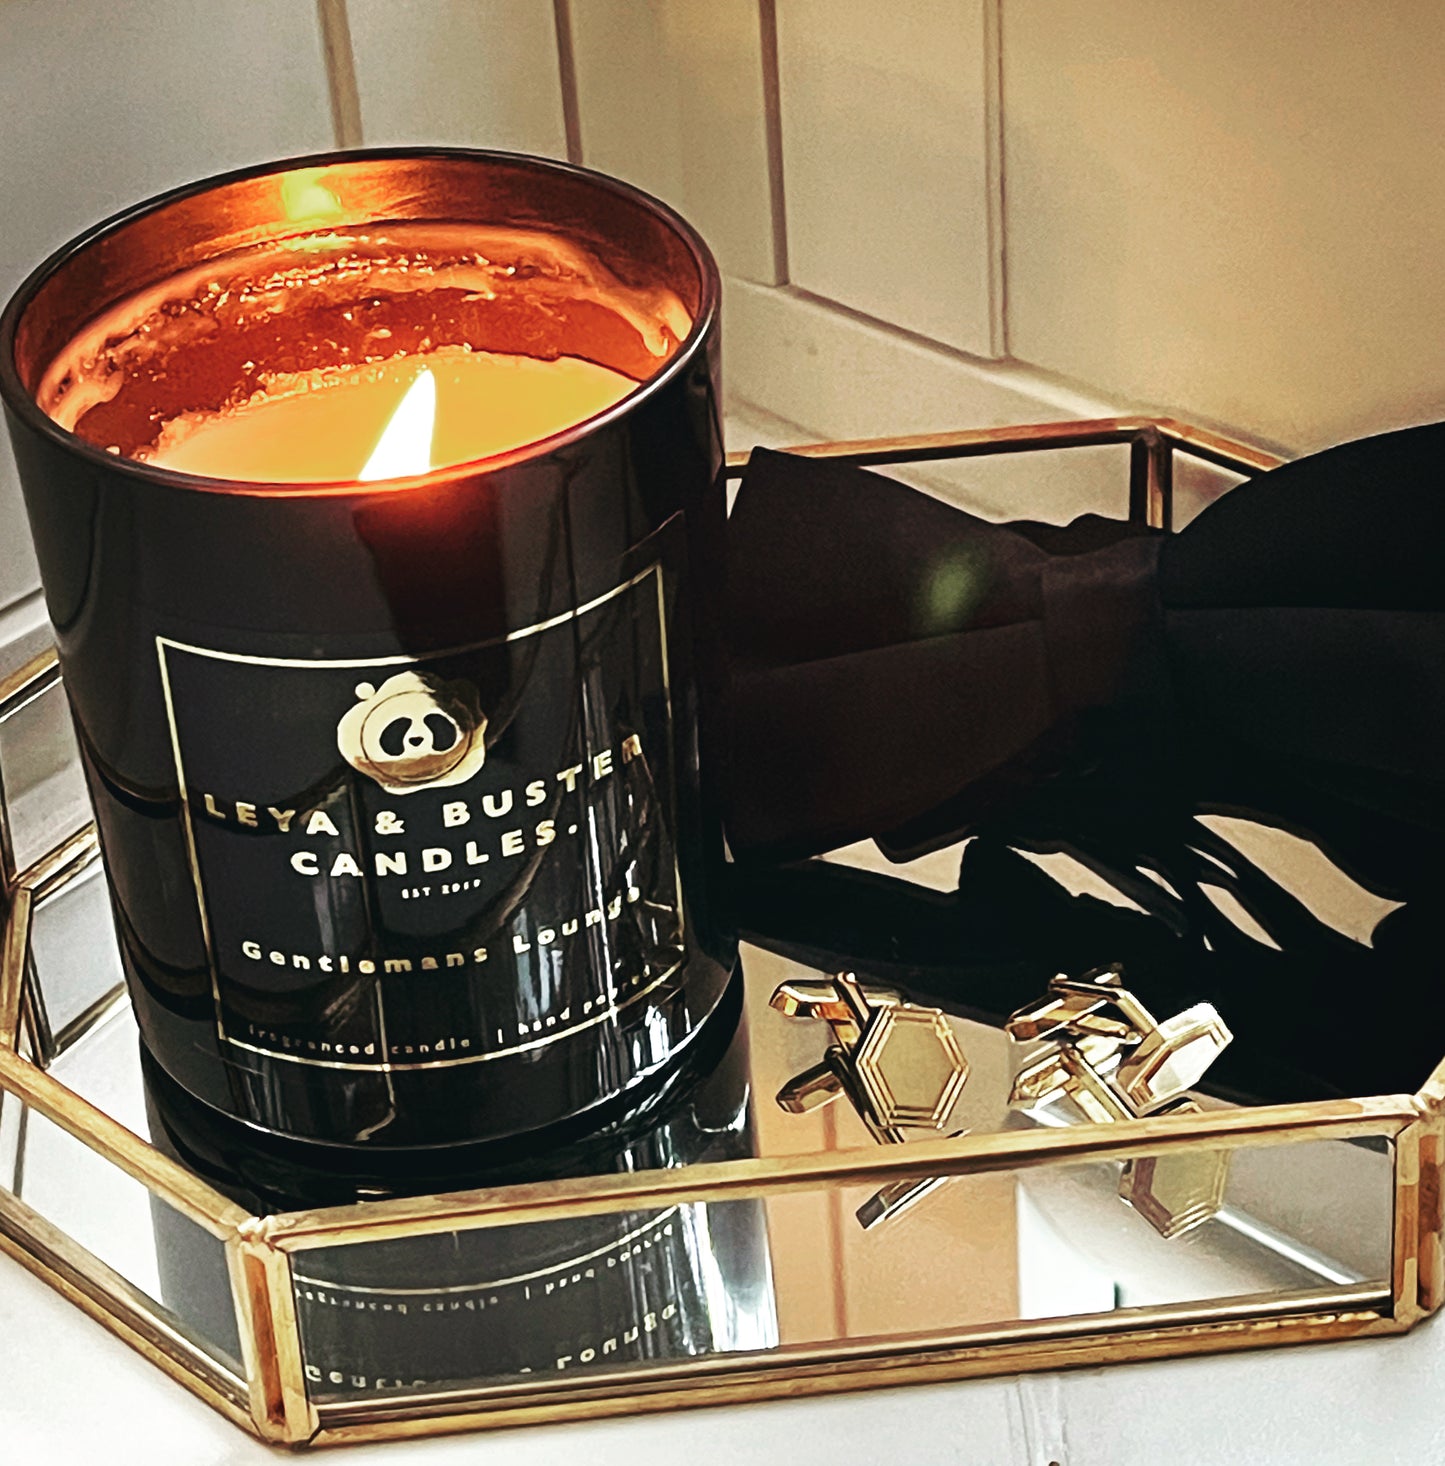 Gentlemans Lounge - Wooden Wick Candle